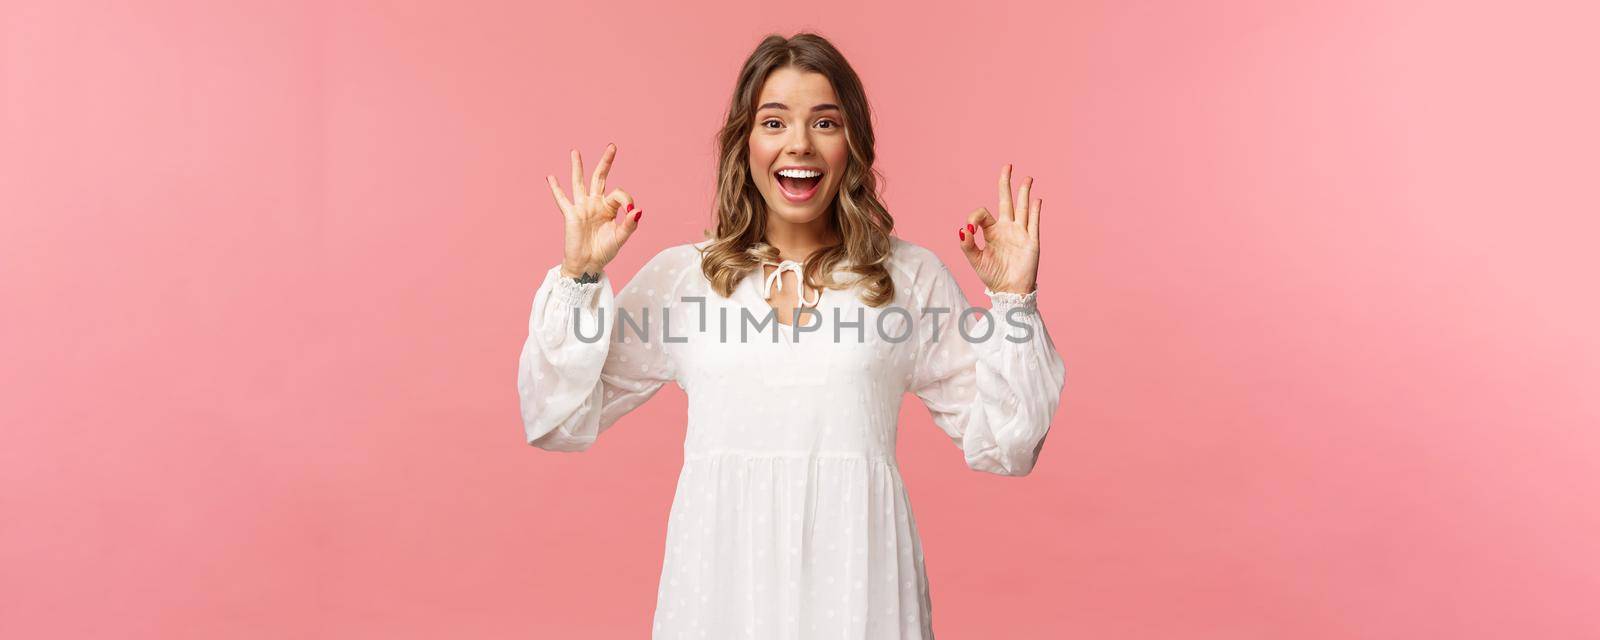 Portrait of happy and pleased good-looking blond woman in white dress, recommend great product, leave positive review, show okay signs and smiling satisfied, standing pink background.